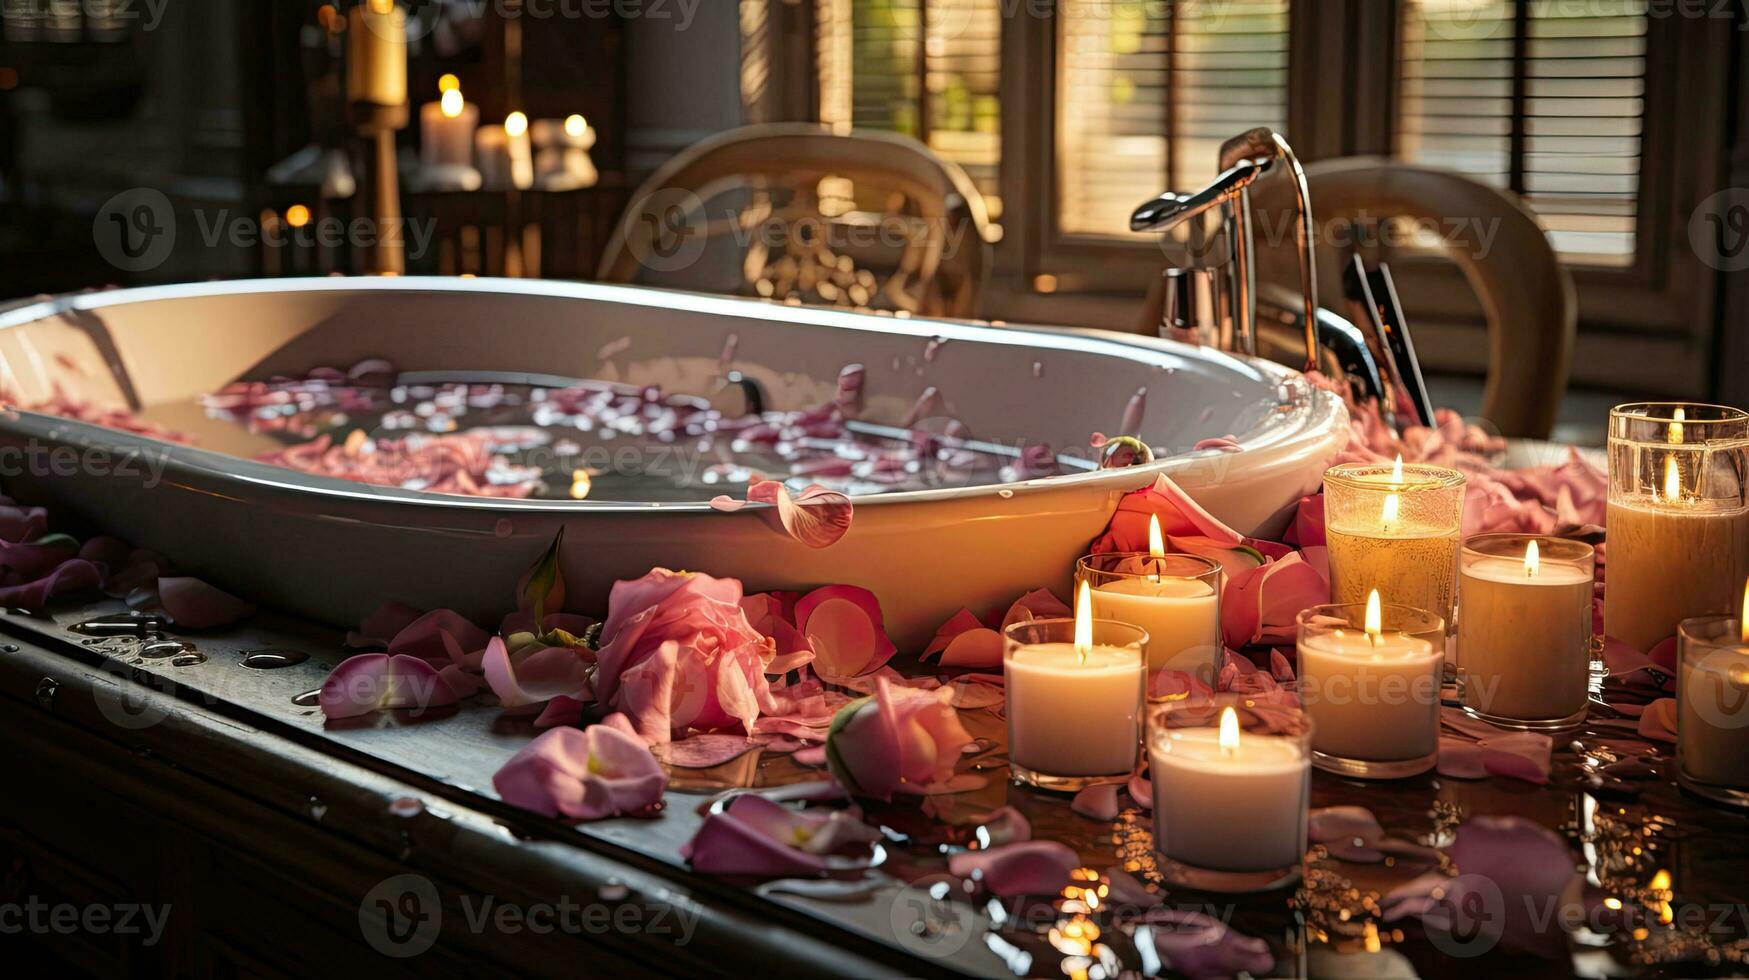 https://static.vecteezy.com/system/resources/previews/033/047/177/non_2x/warm-romantic-relaxing-bath-with-rose-petals-and-burning-candles-photo.jpg